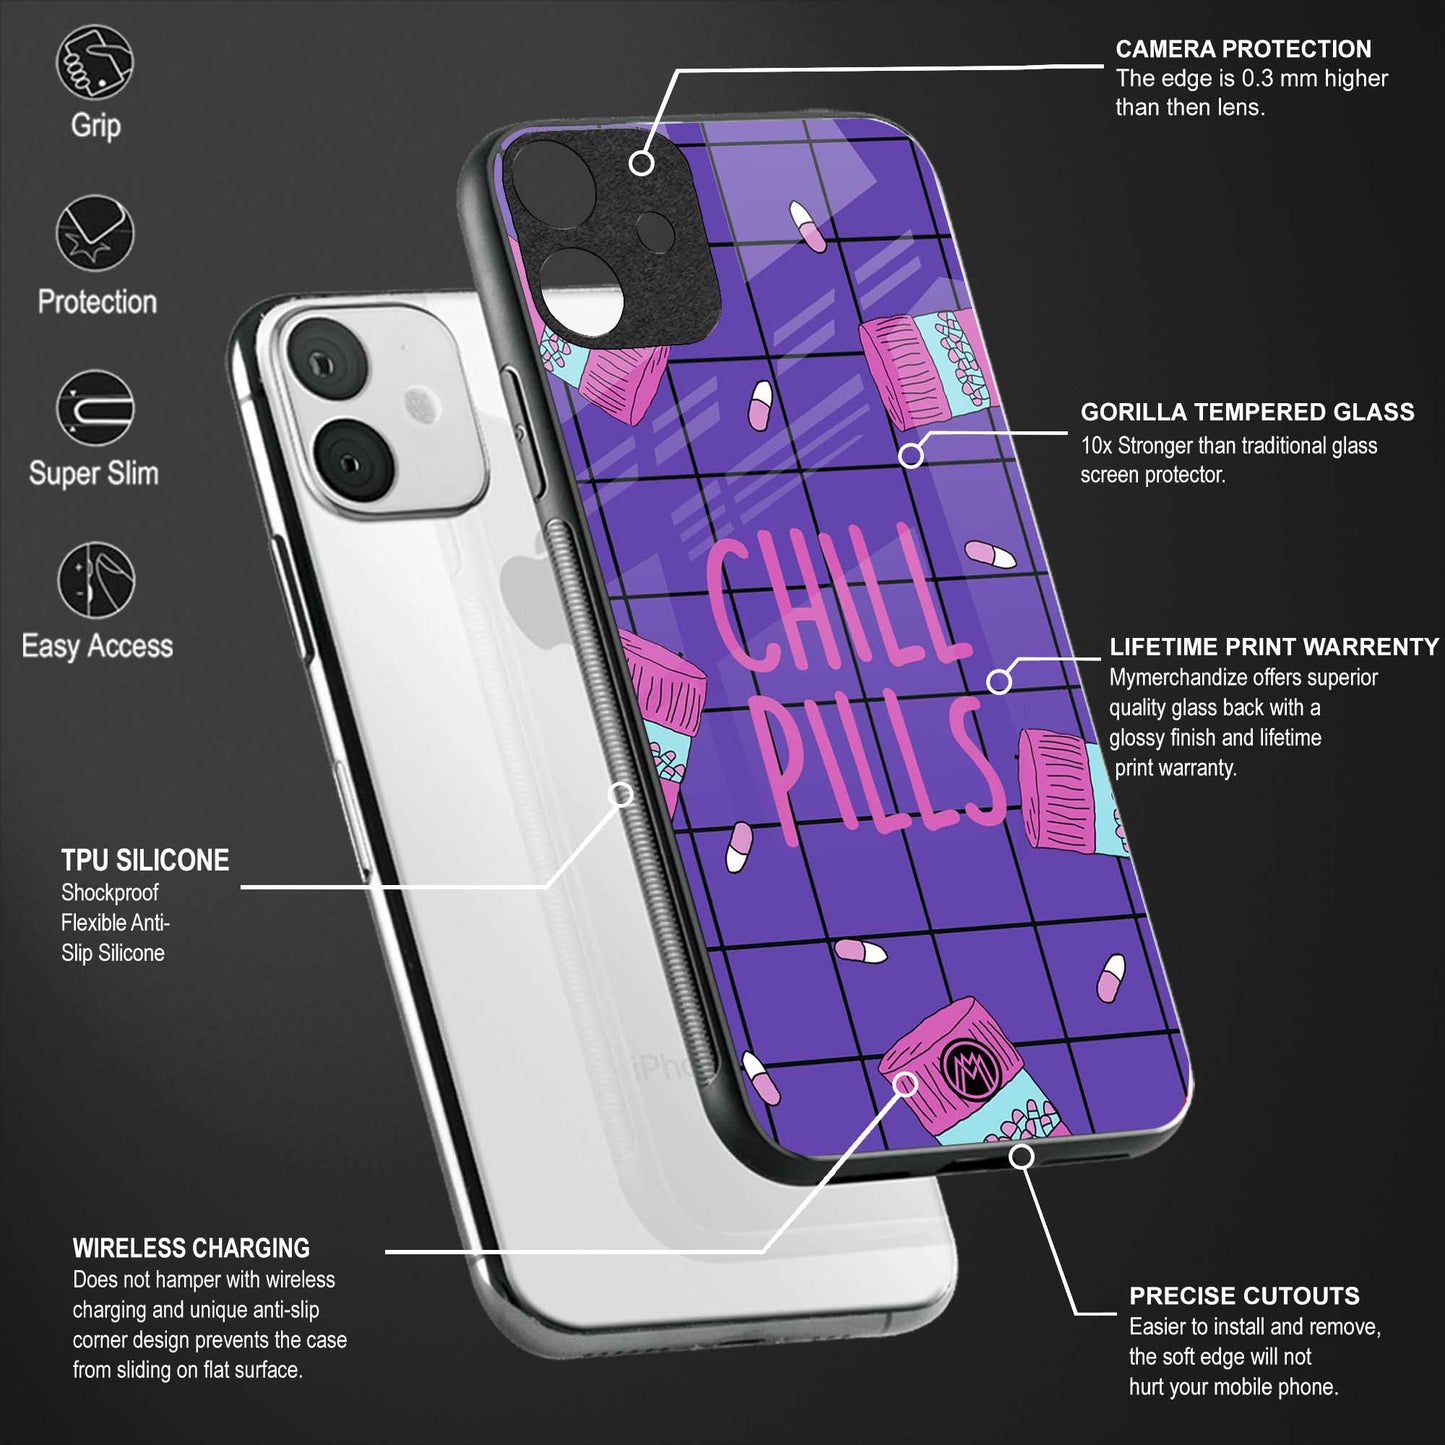 chill pills back phone cover | glass case for redmi note 11 pro plus 4g/5g